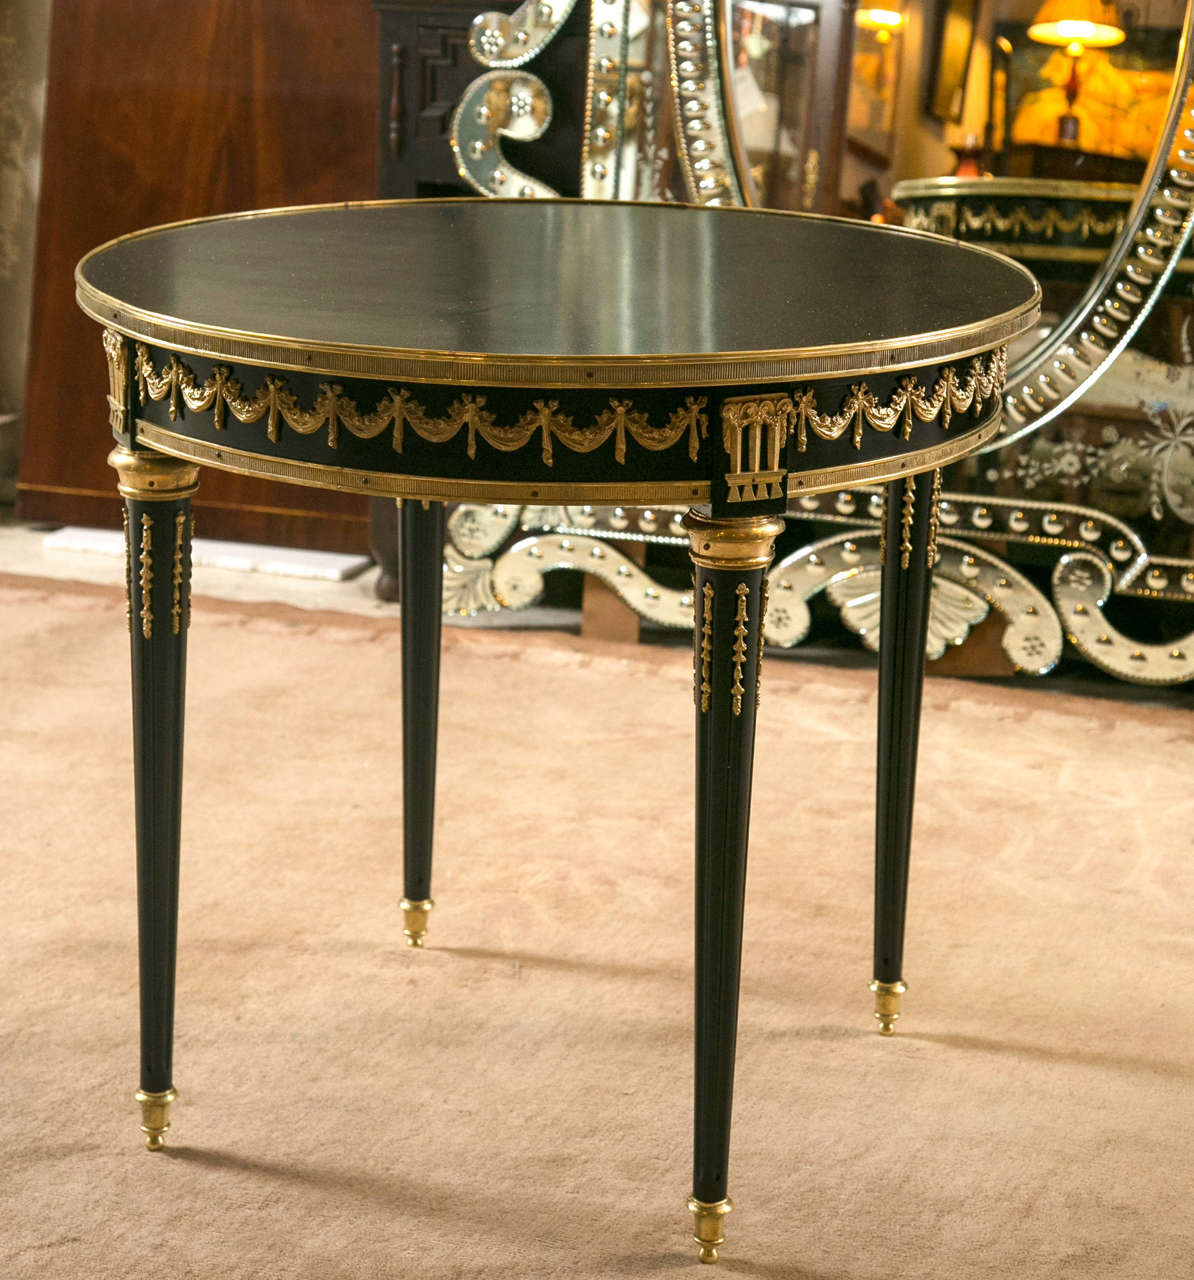 Ebonized and bronze mounted centre table by Maison Jansen. This fine Louis XVI style centre table has bronze chased sabots leading to tapering fluted legs terminating in bronze flames and bronze caps. The bronze framed apron having ribbon and swag